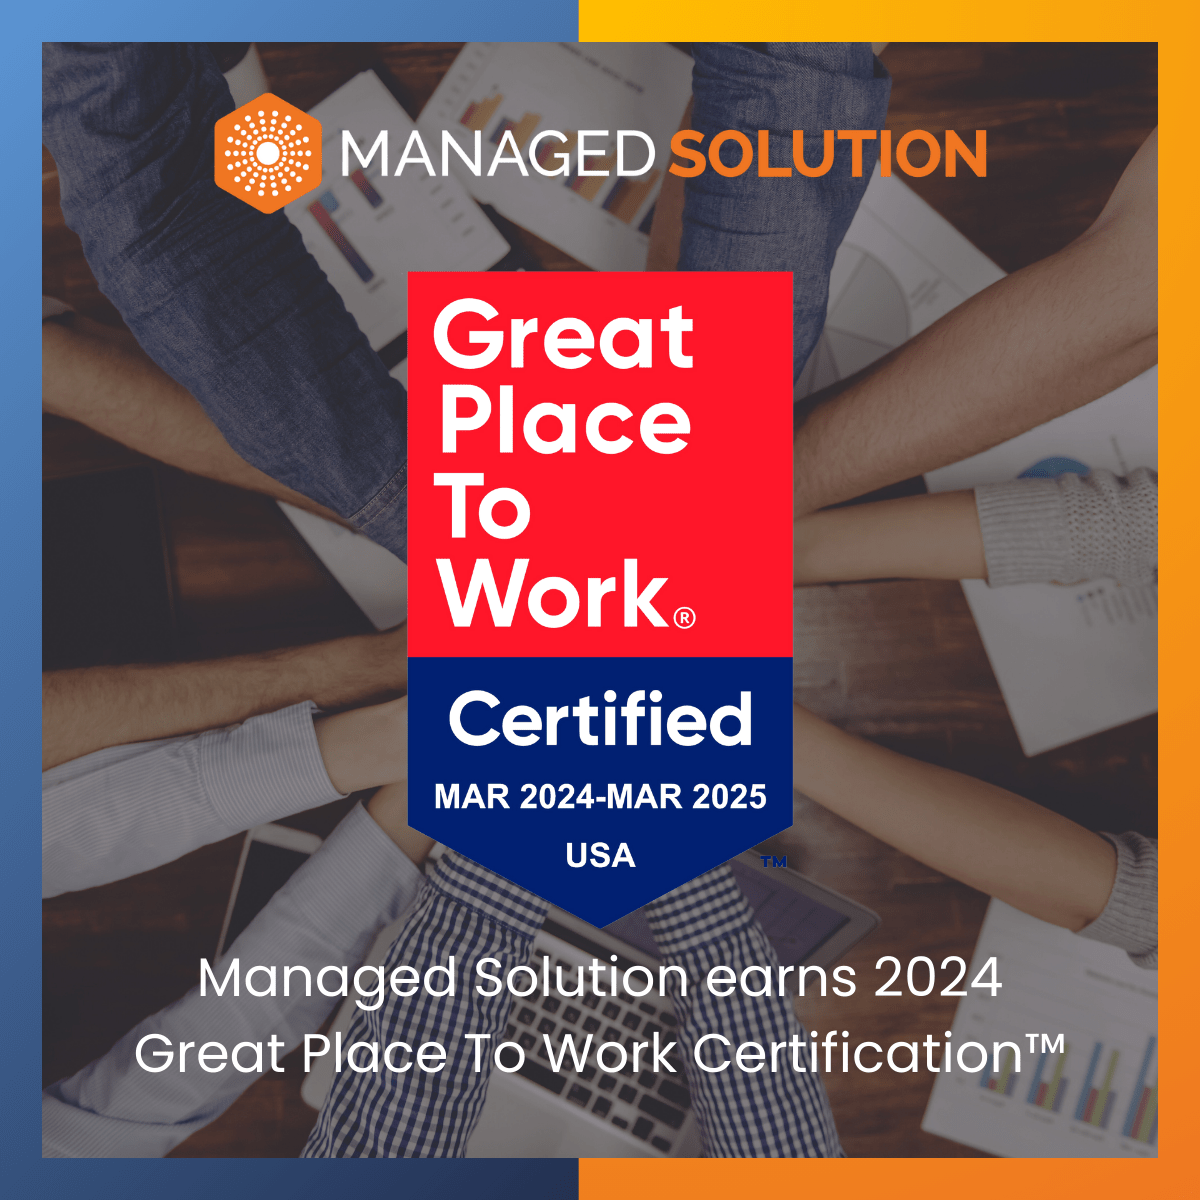 Managed Solution is certified as a Great Place to Work in 2024